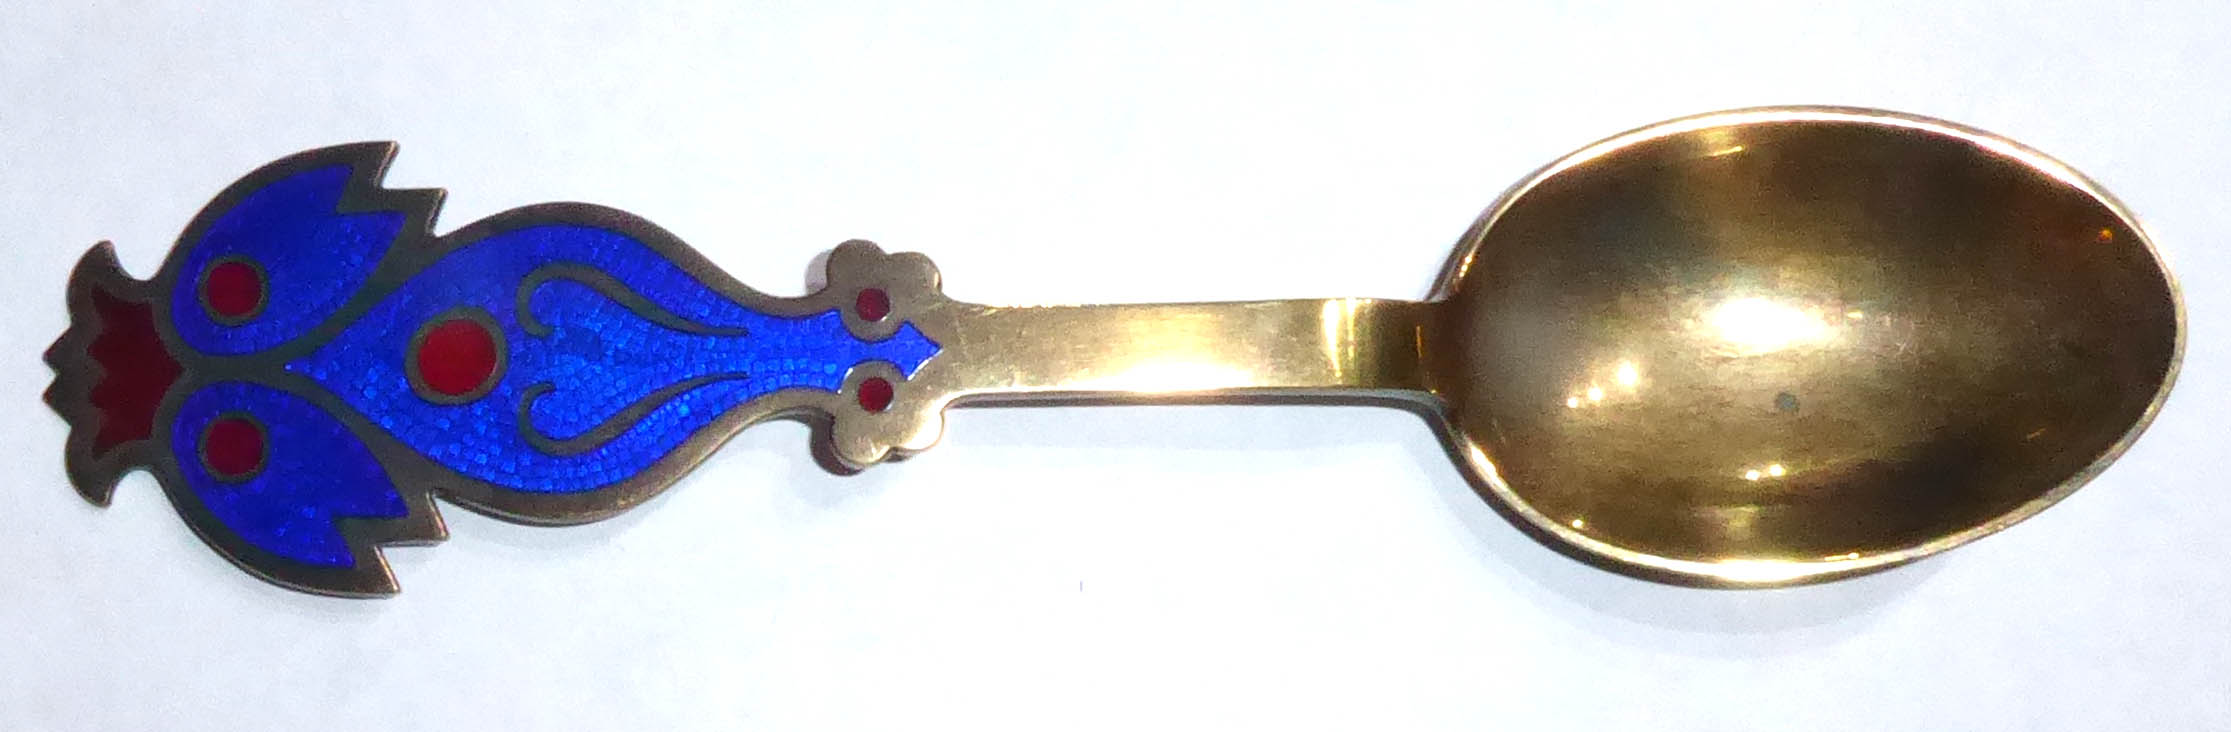 A. MICHELSON, DENMARK, A 20TH CENTURY SILVER AND ENAMEL SPOON Enamelled with a stylized bird with